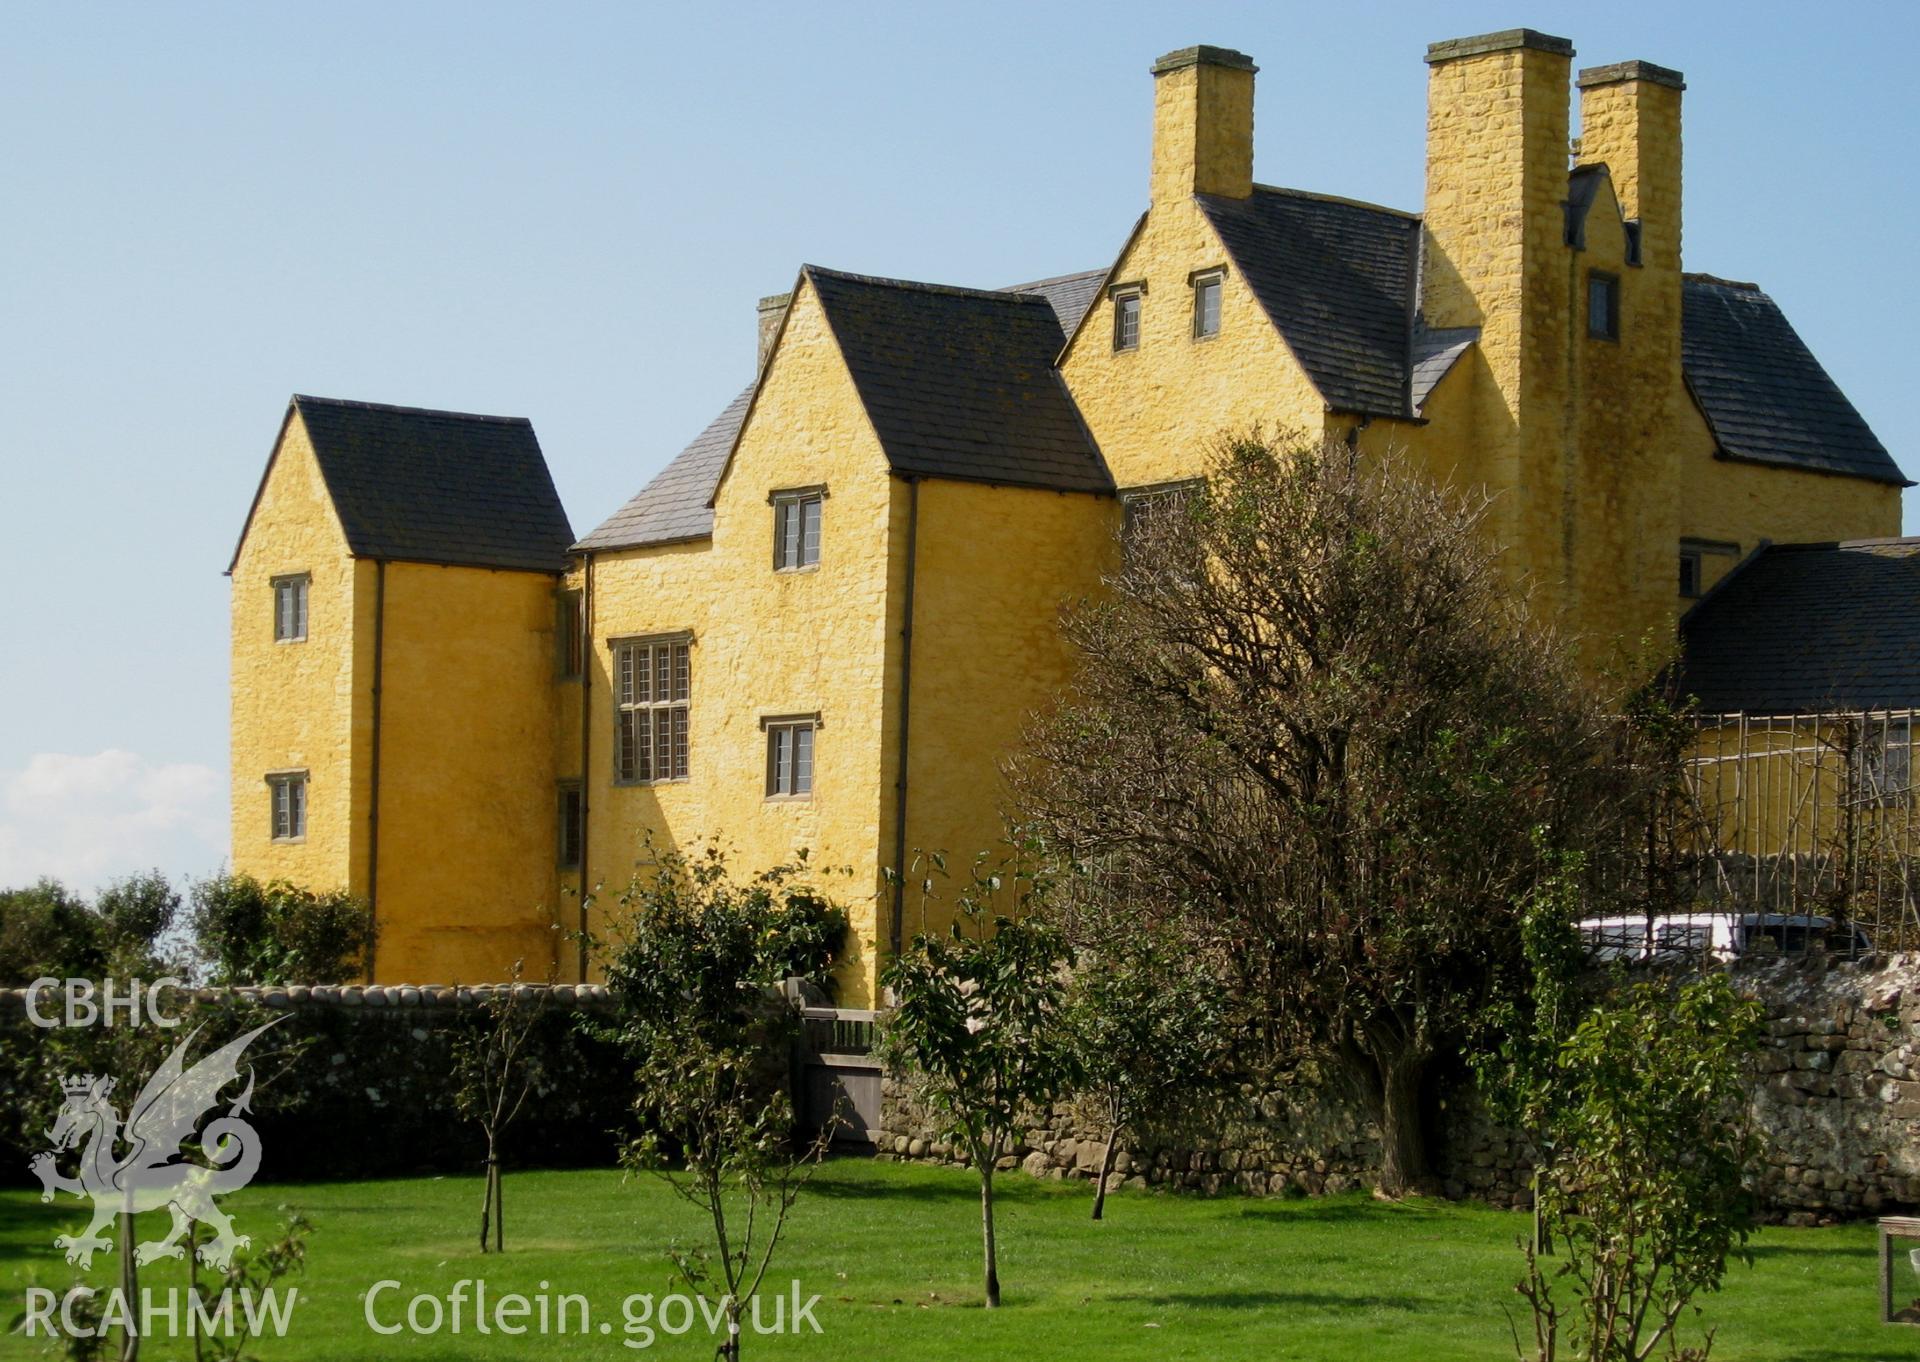 Colour photo showing Sker House, taken by Paul R. Davis and dated 28th June 2006.